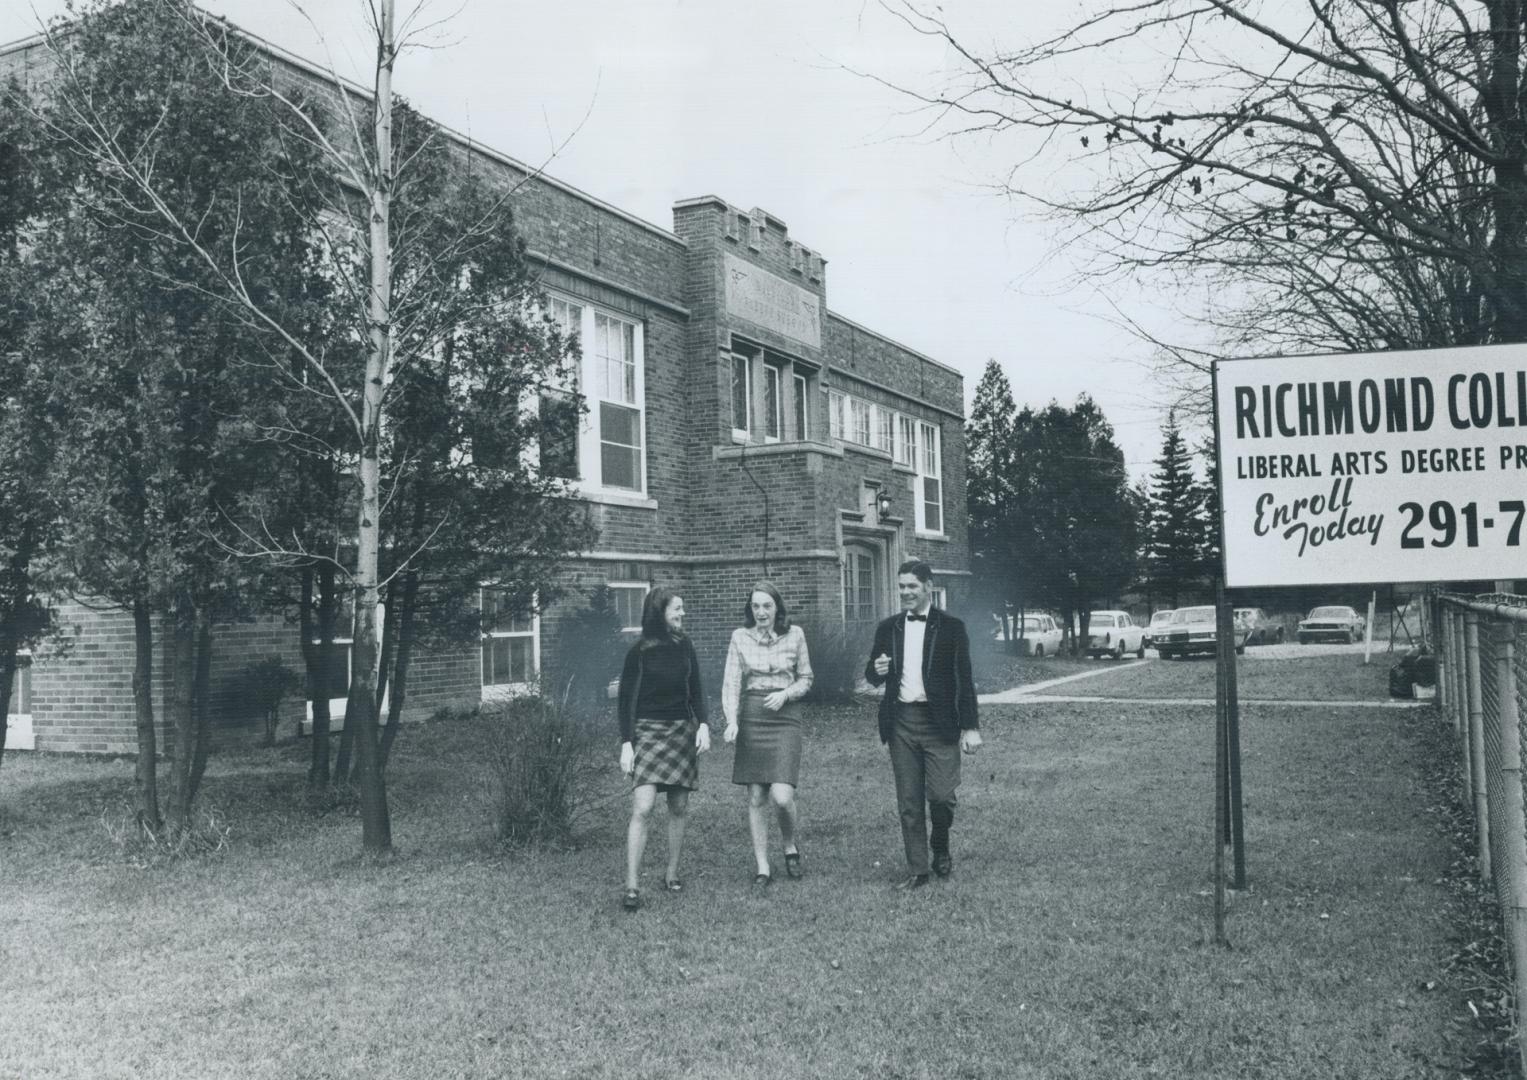 It's small - that is what appeals most to the students of Richmond College which has been open for three years in the former Milliken Public School